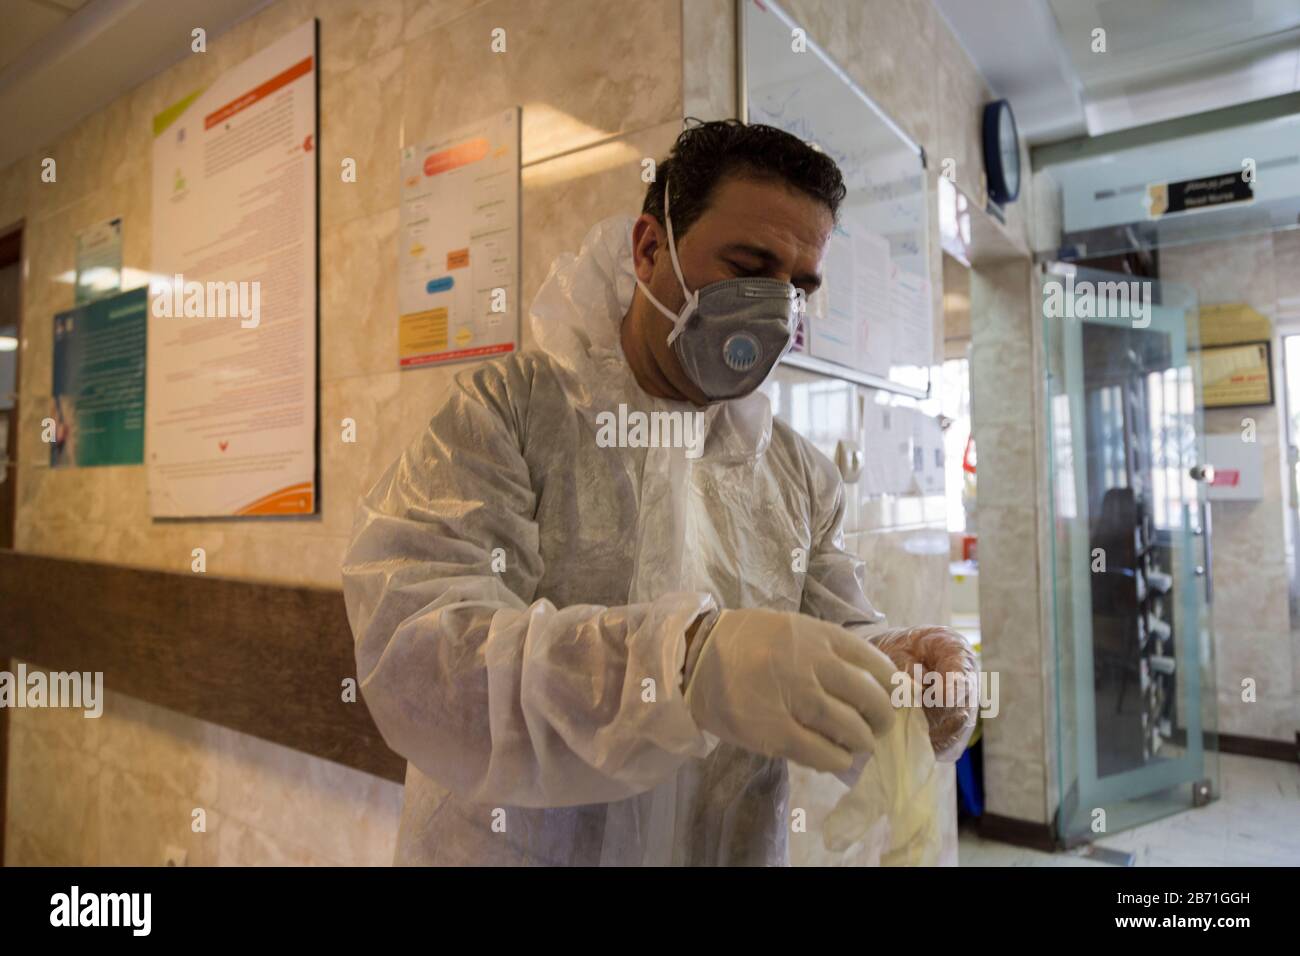 Tehran, Iran. 12th Mar, 2020. Medics and nurses wearing masks and hazmat suits treat patients infected with the new coronavirus COVID-19, at Sina hospital in southern Tehran, Iran. According to the last report by the Ministry of Health, 10,075 people were diagnosed with the Covid-19 coronavirus and 429 people have died in Iran. The outbreak has infected a host of senior officials, politicians, clerics and members of the Revolutionary Guards in Iran, the fourth worst-affected nation after China, South Korea, and Italy. Credit: ZUMA Press, Inc./Alamy Live News Stock Photo